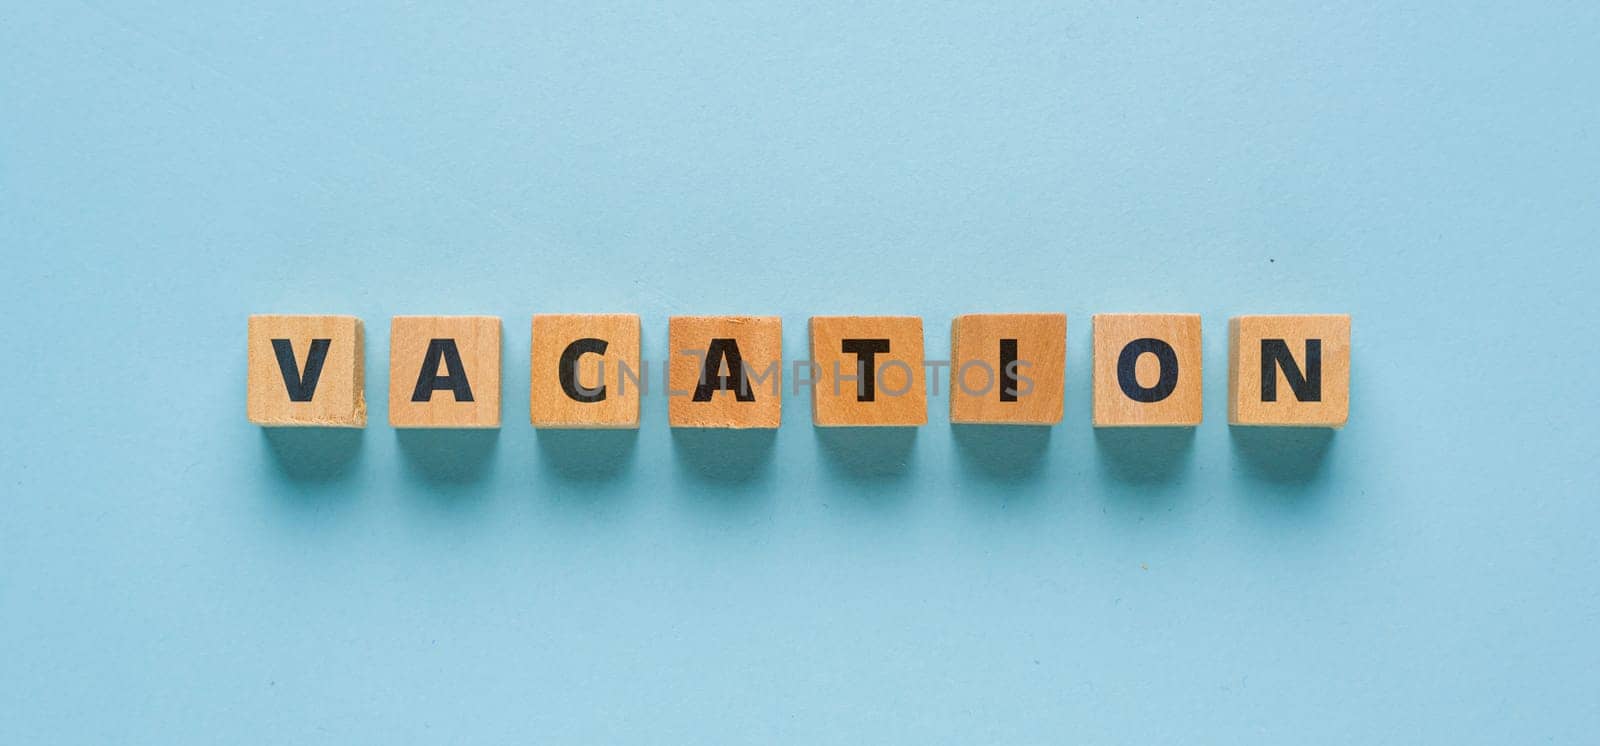 Vacation is written on wooden cubes on a blue background by Sonat